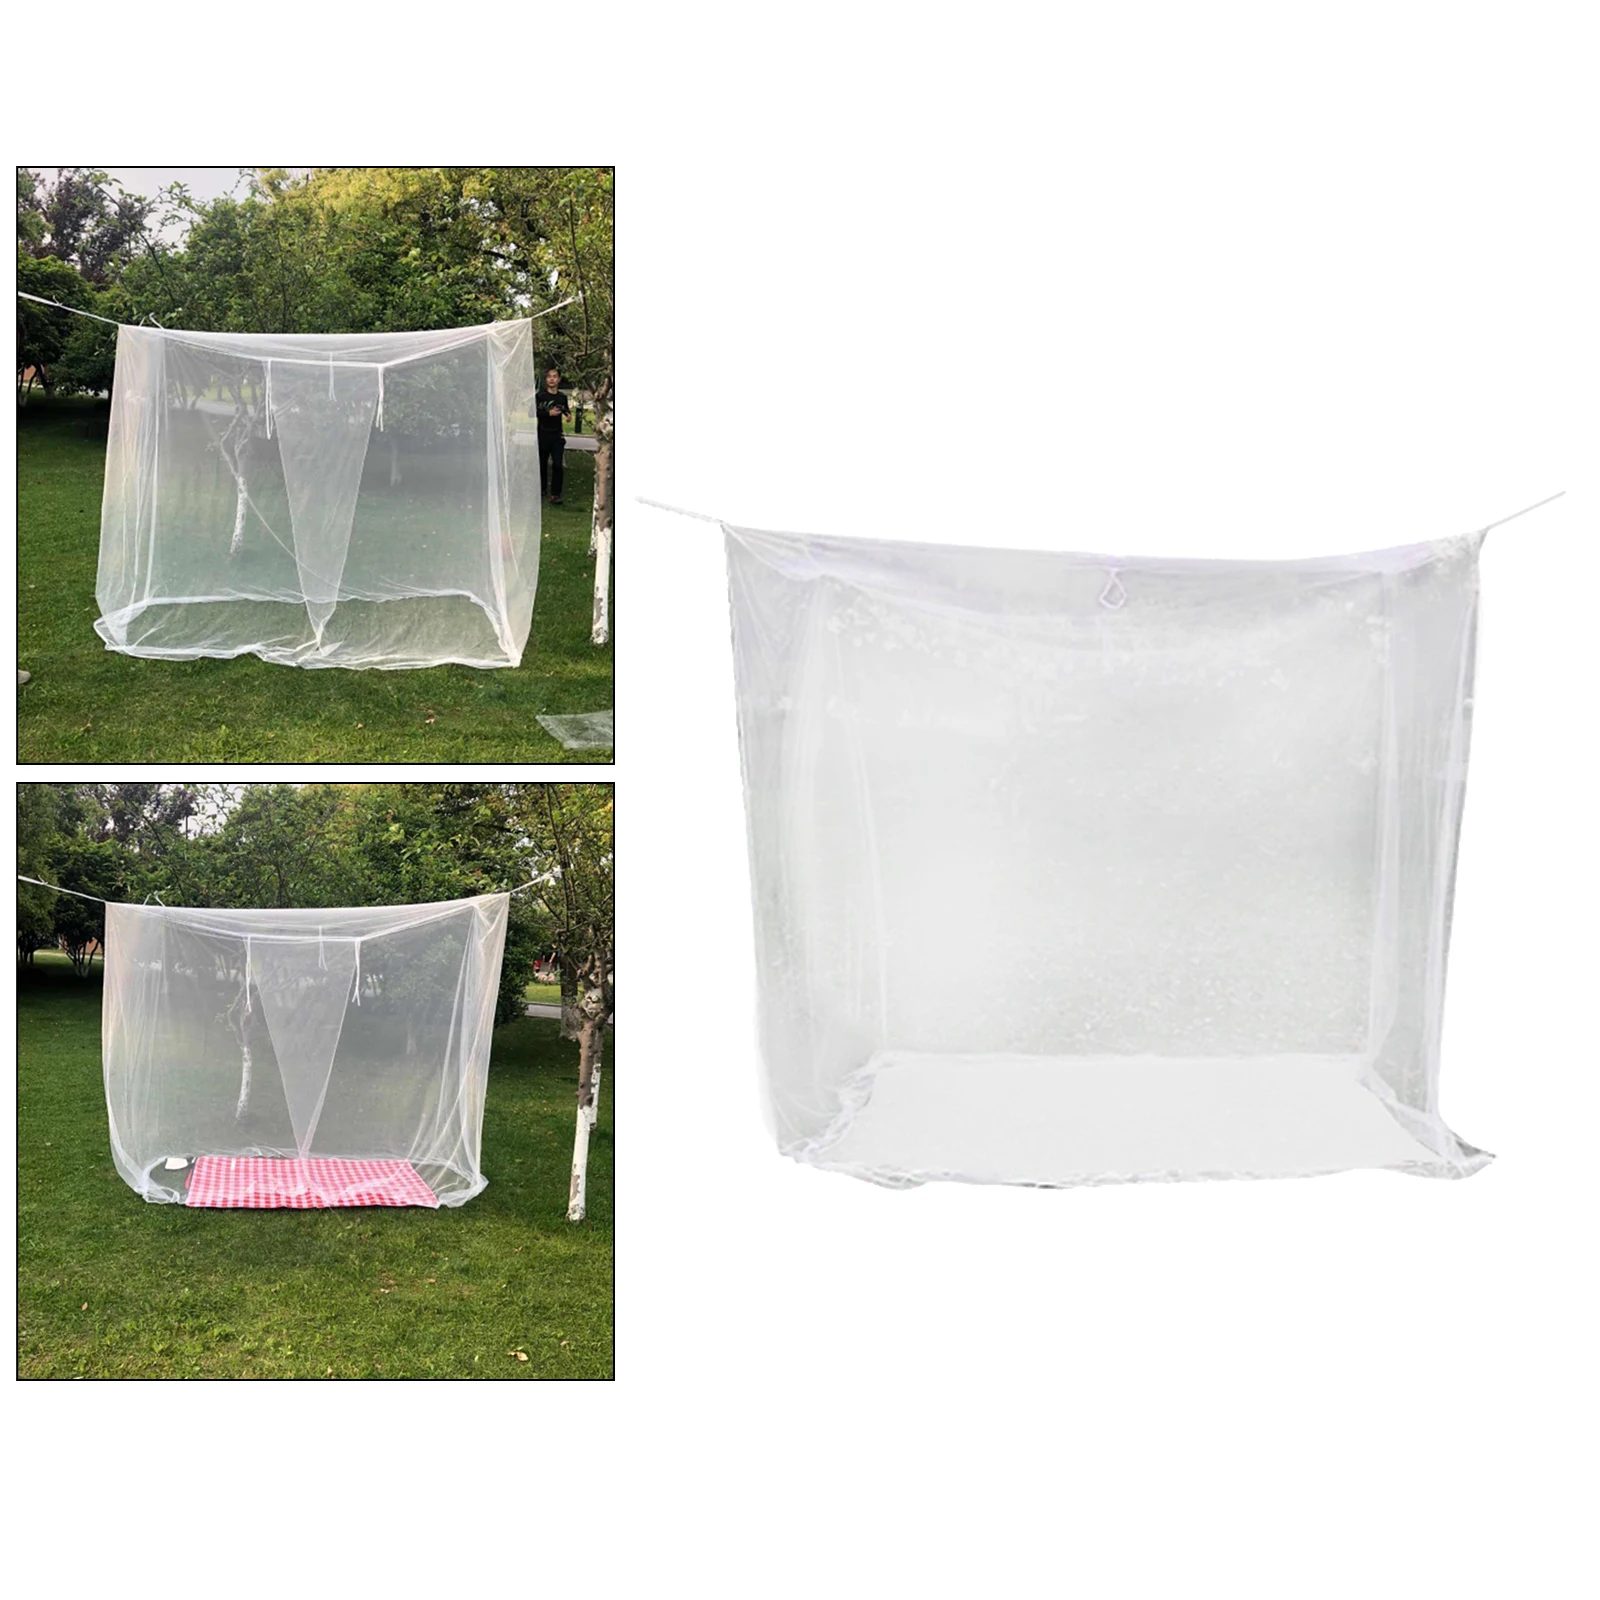 Camping Insect Mosquito Net Tent Outdoor Netting Cover Canopy Travel Sleep Tent 